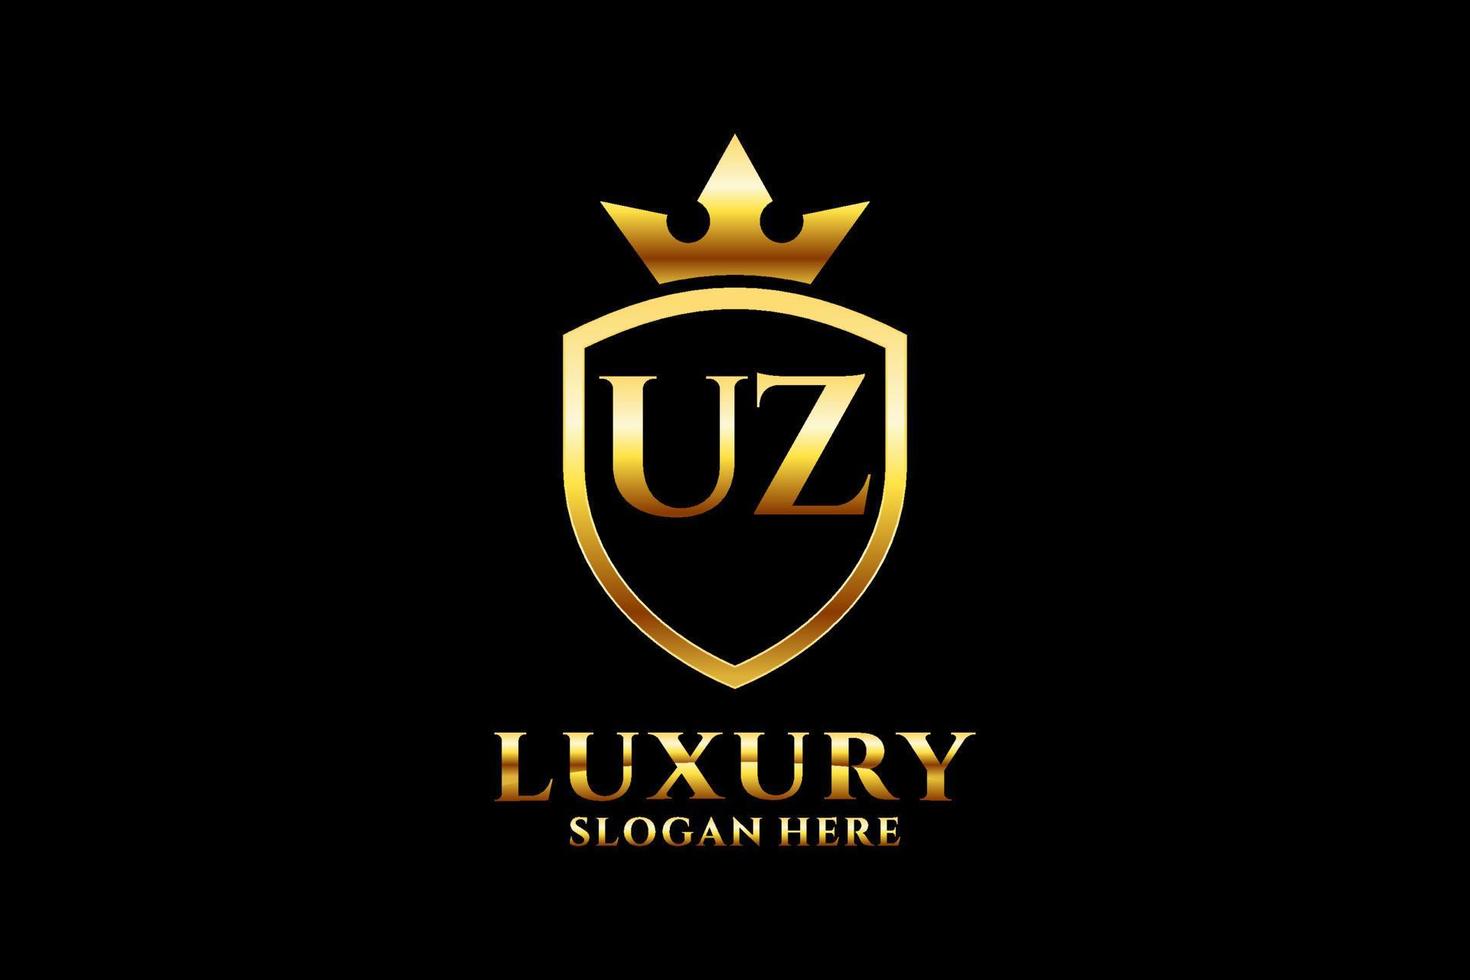 initial UZ elegant luxury monogram logo or badge template with scrolls and royal crown - perfect for luxurious branding projects vector